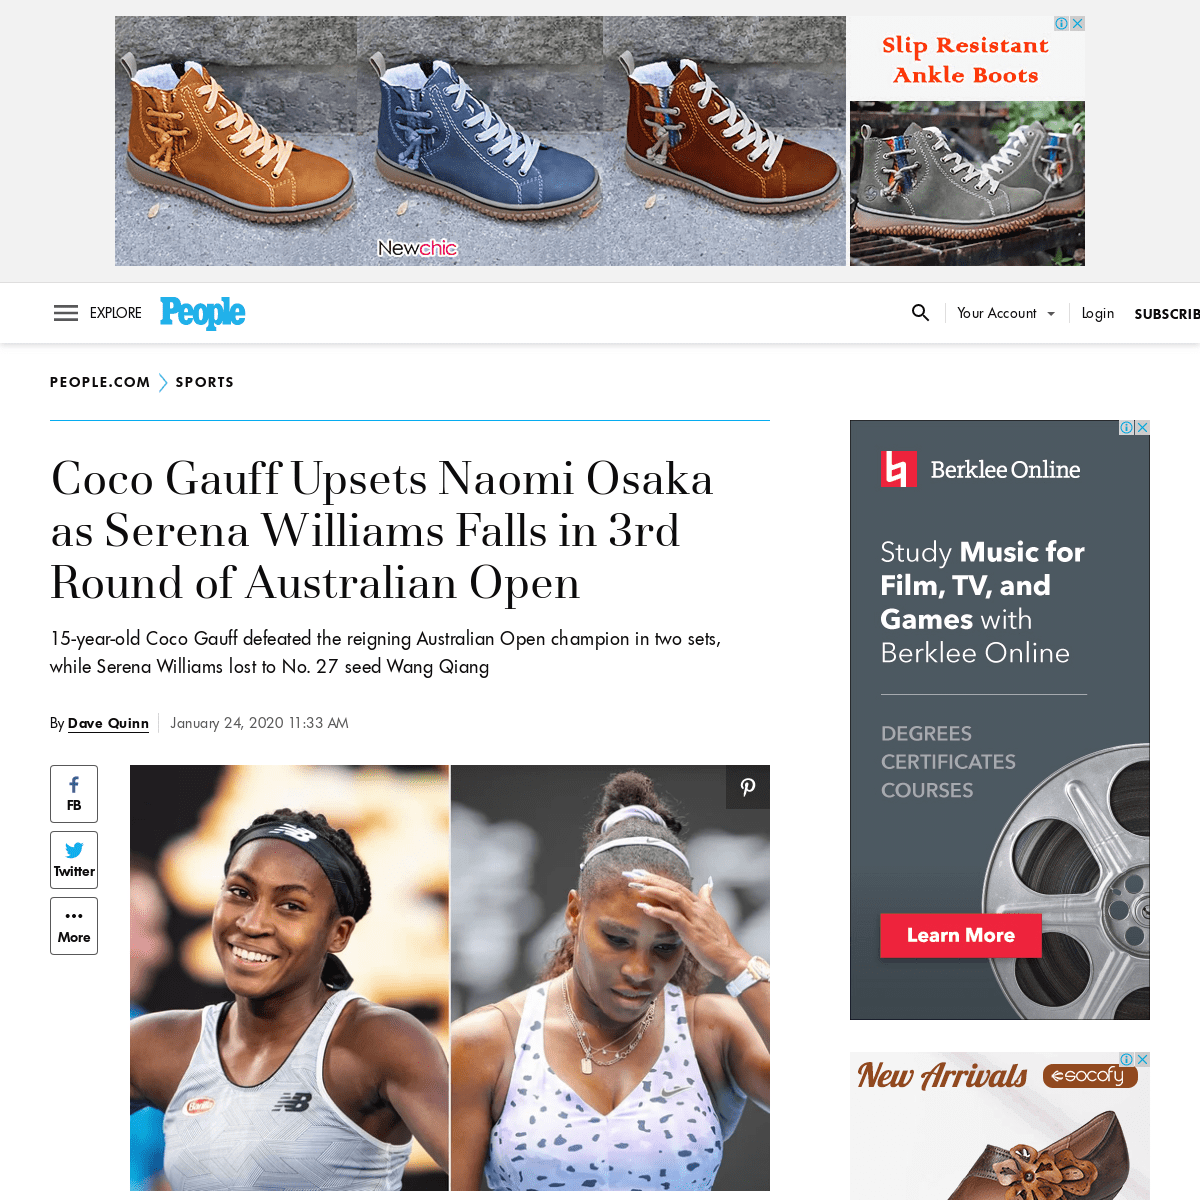 A complete backup of people.com/sports/coco-gauff-upsets-naomi-osaka-as-serena-williams-falls-in-3rd-round-of-australian-open/